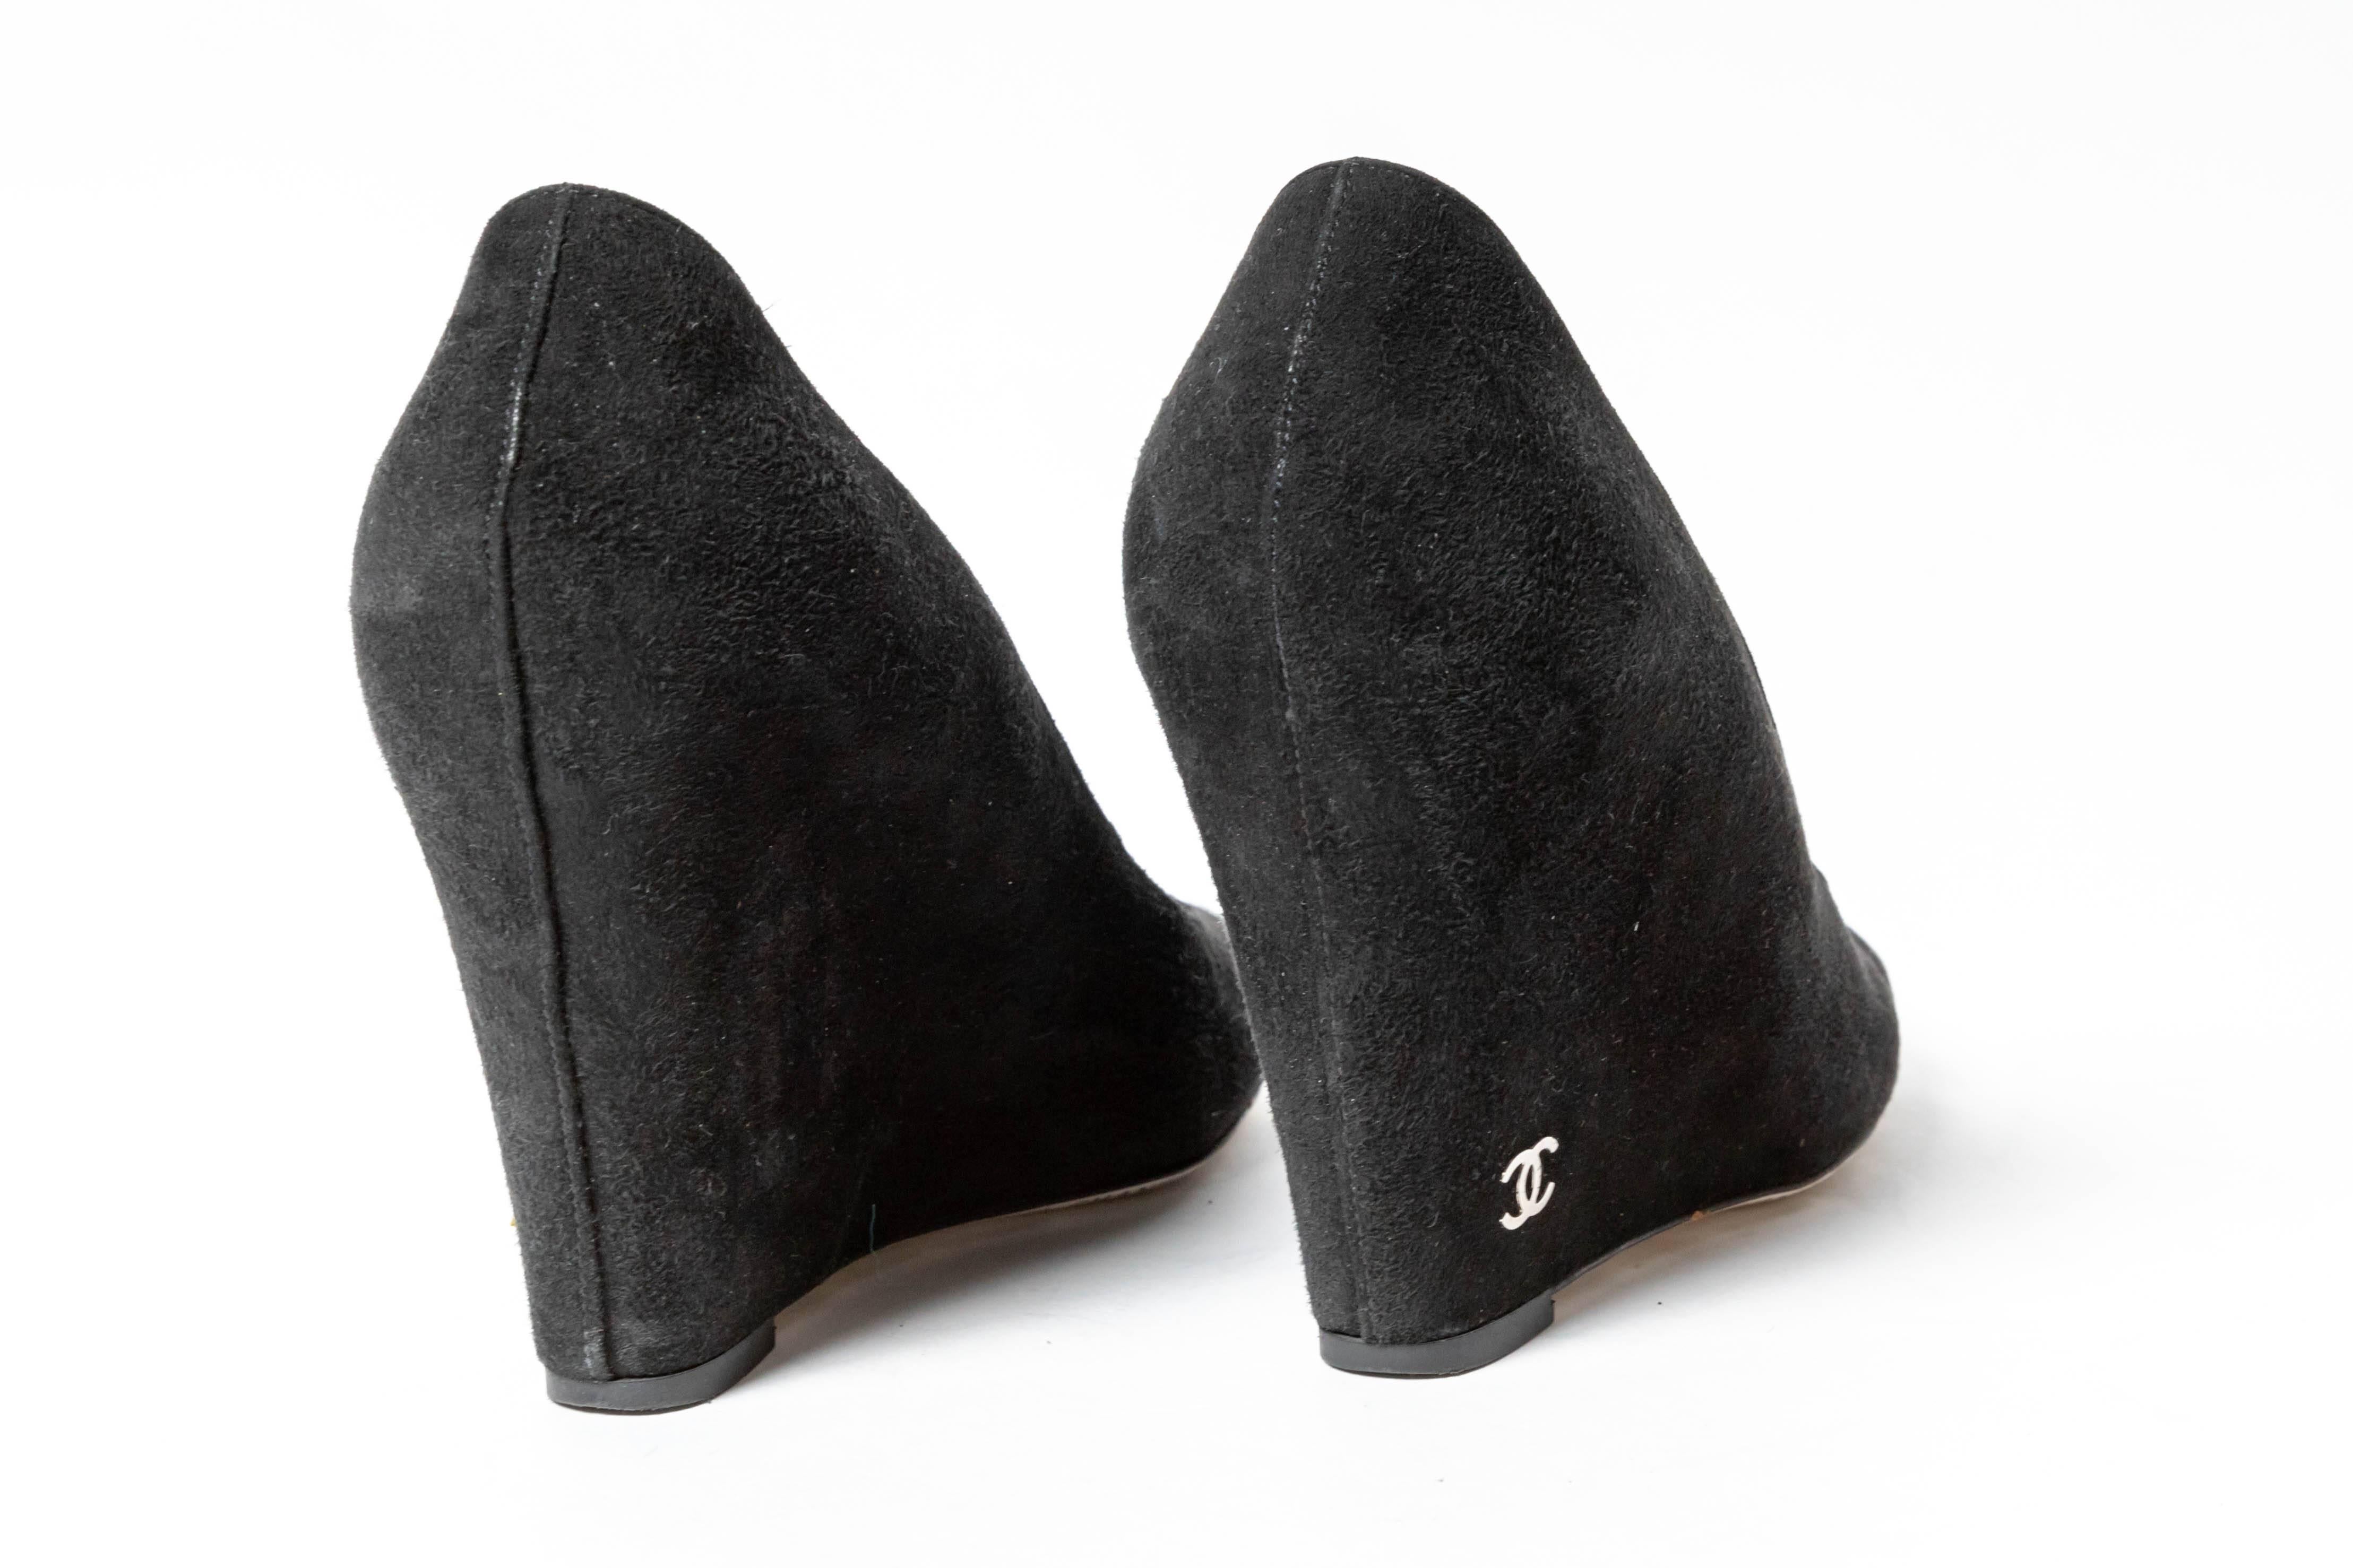 Chanel Silver and Black Suede Wedges - Size 37.5 / 7.5 2